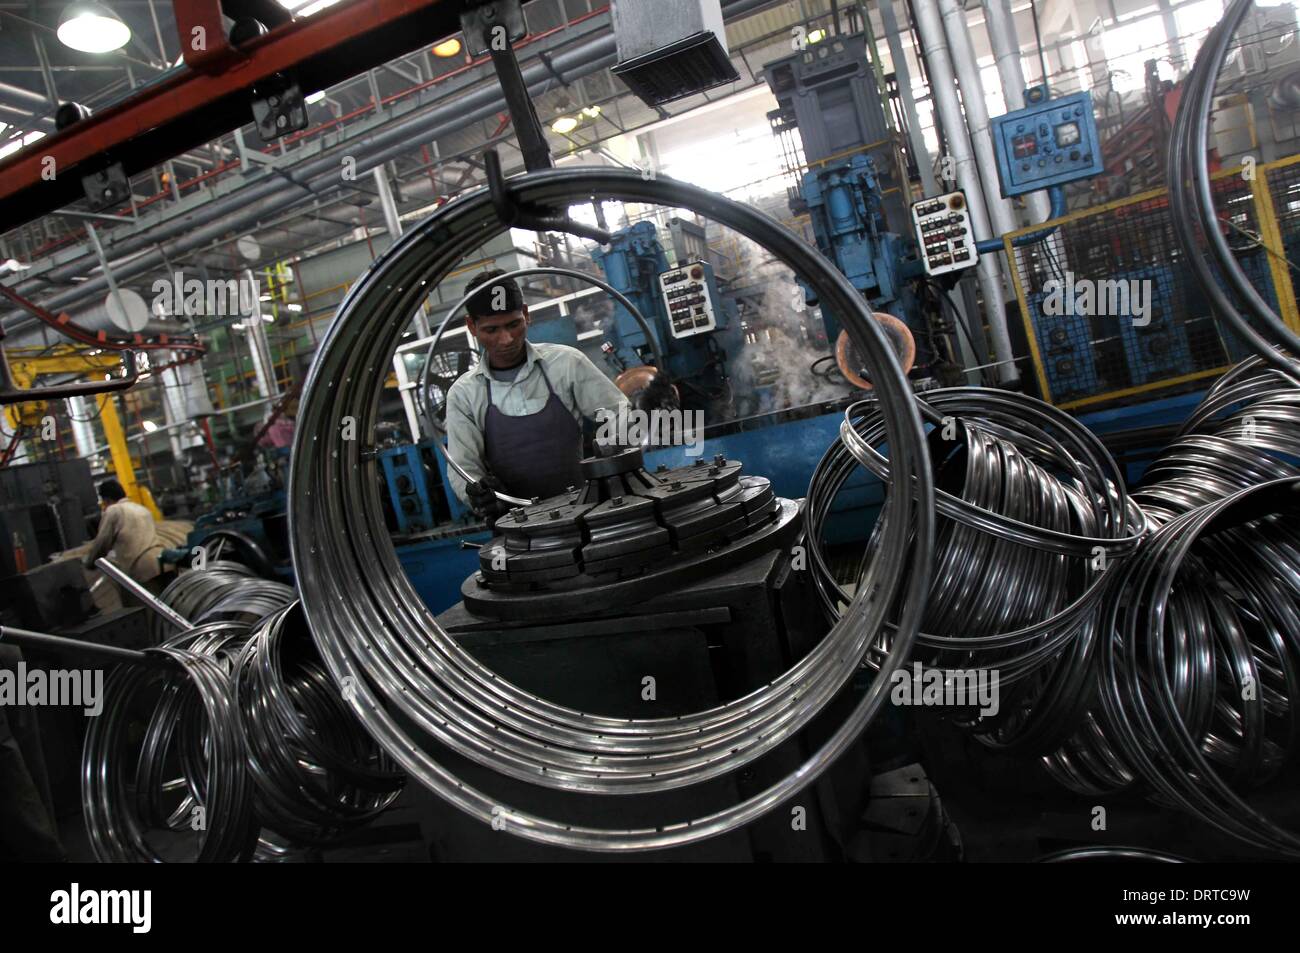 (140201) -- PUNJAB, Feb. 1, 2014 (Xinhua) -- Workers make bicycle parts at a factory at Ludhina in Indian state of Punjab, Feb. 1, 2014. The north Indian state is the hub of bicycle manufacturing. Officials said 40,000-50,000 bicycles are manufactured in the city everyday and exported to Indian states and other countries. The state has around 4000 registered small and large units associated with making bicycle parts. (Xinhua/Javed Dar) Stock Photo